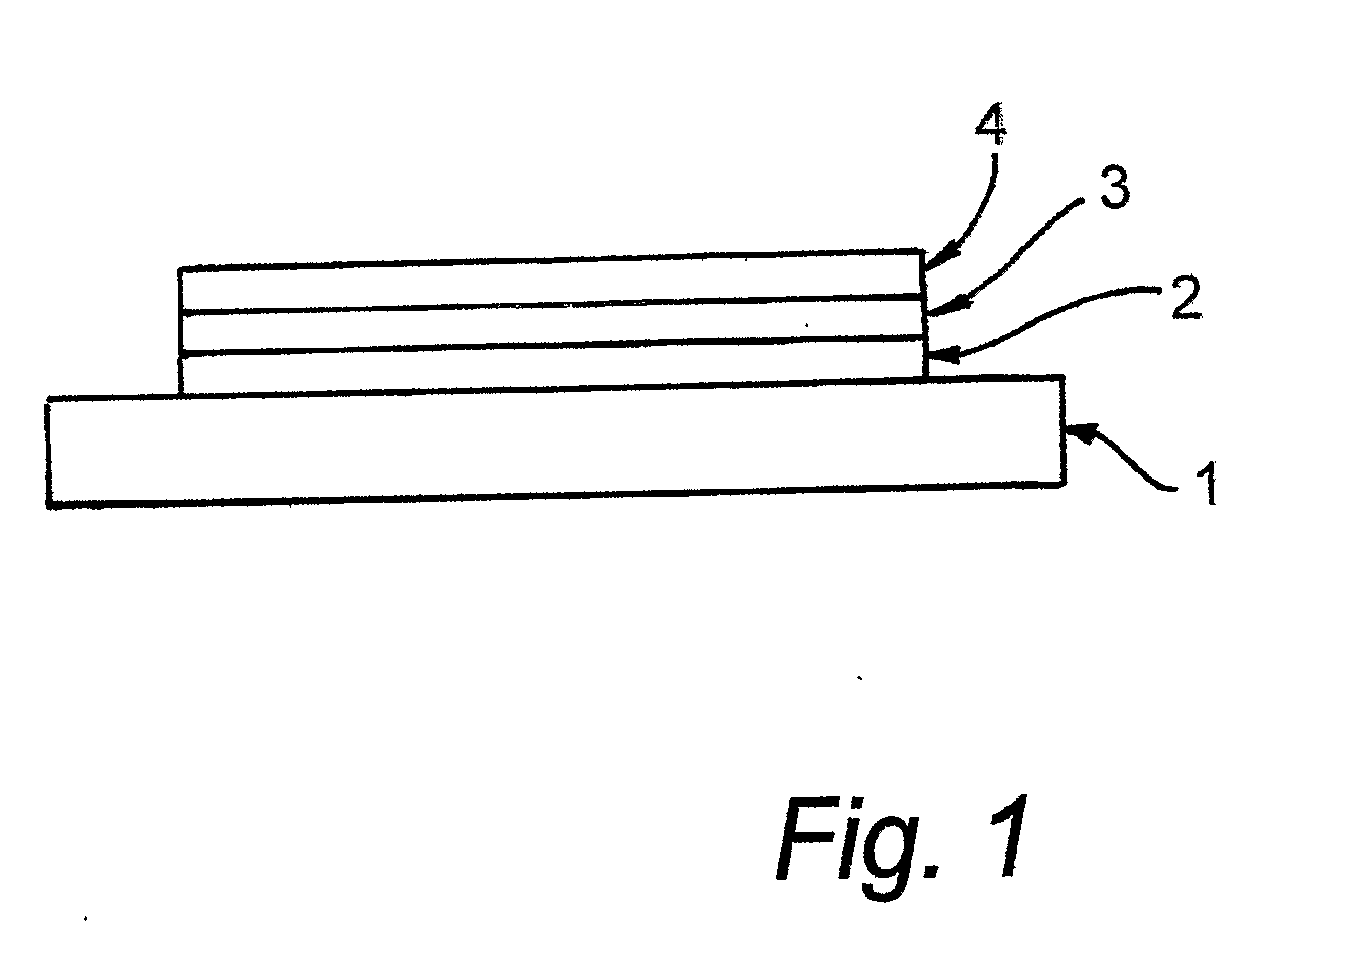 Conductive Polymer Compositions in Opto-Electrical Devices